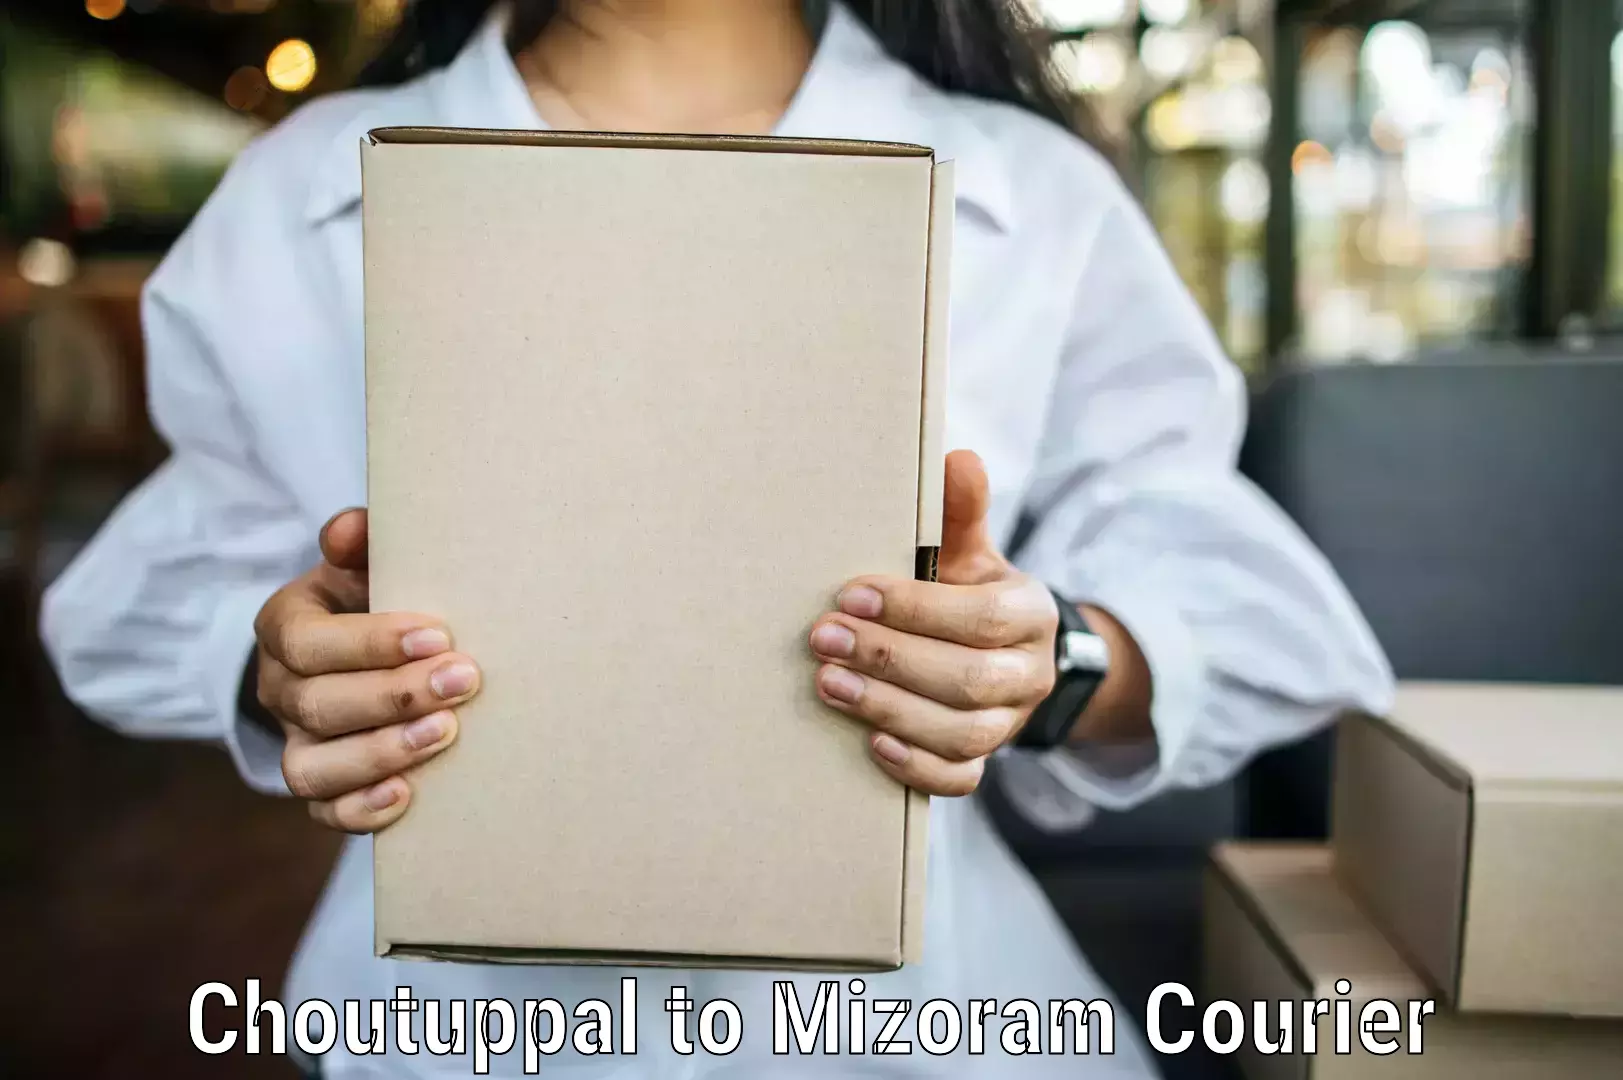 State-of-the-art courier technology Choutuppal to Mizoram